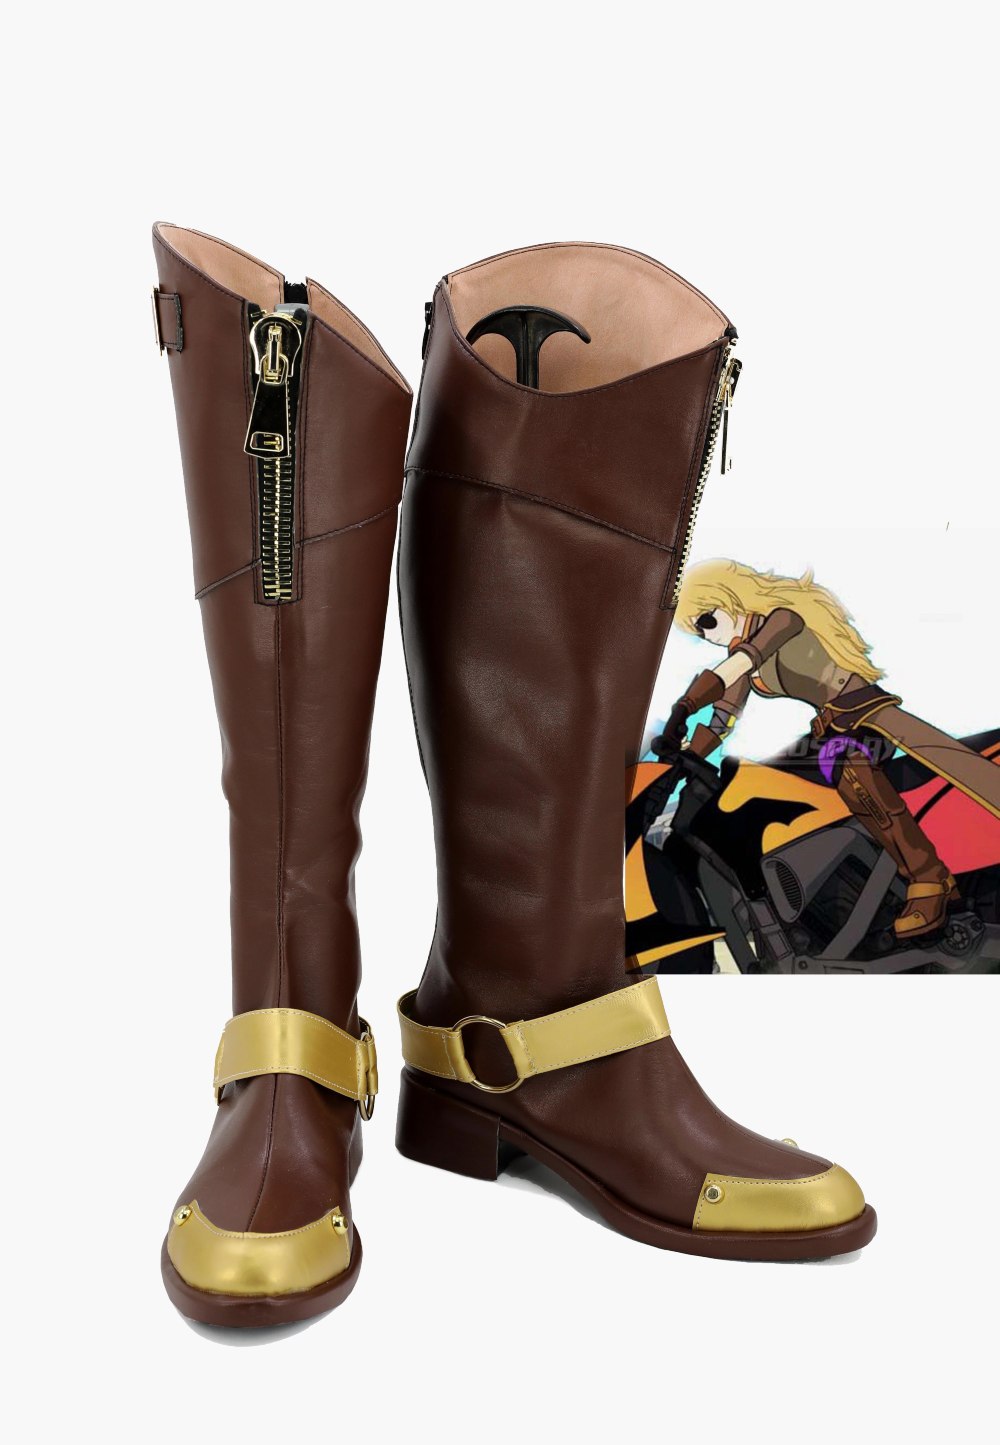 RWBY volume 4 Yang Xiao Longs Bottes Cosplay Chaussures